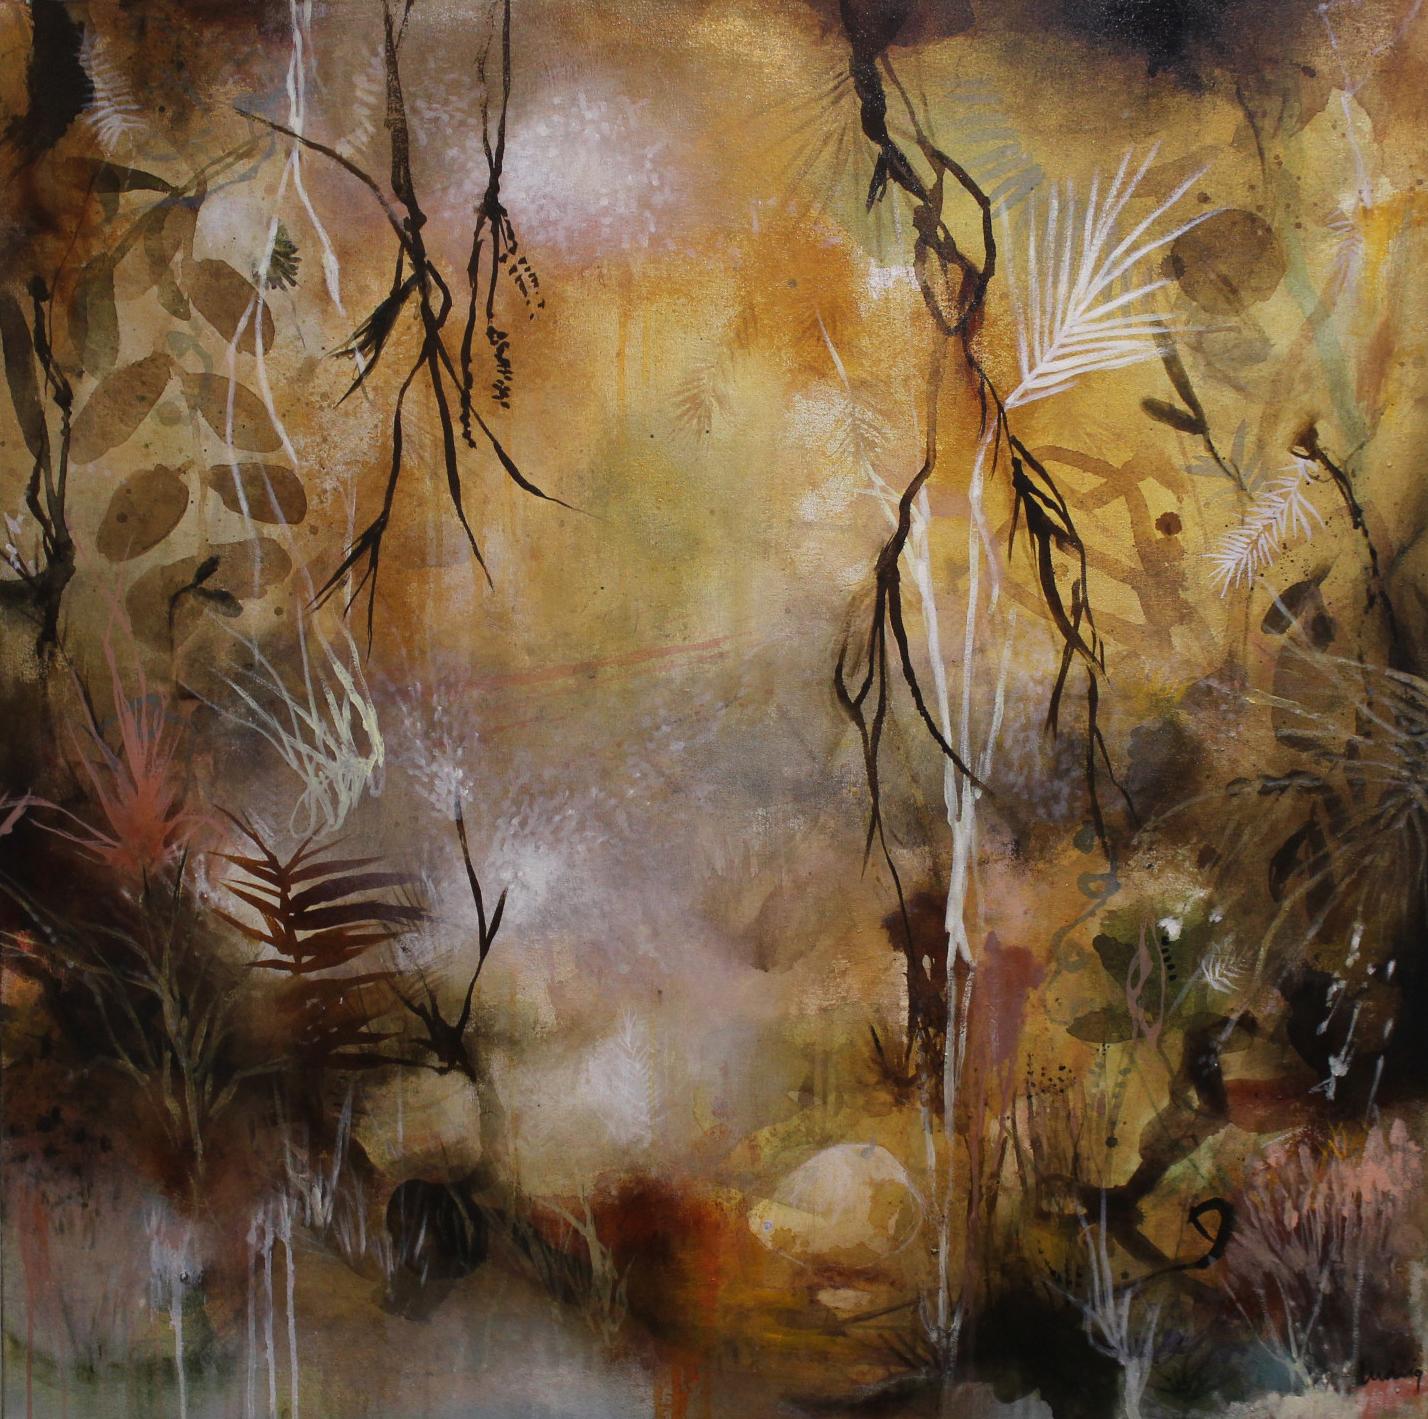 Deedra Ludwig Abstract Painting - "Pathway" original abstract oil and mixed media flora painting on canvas